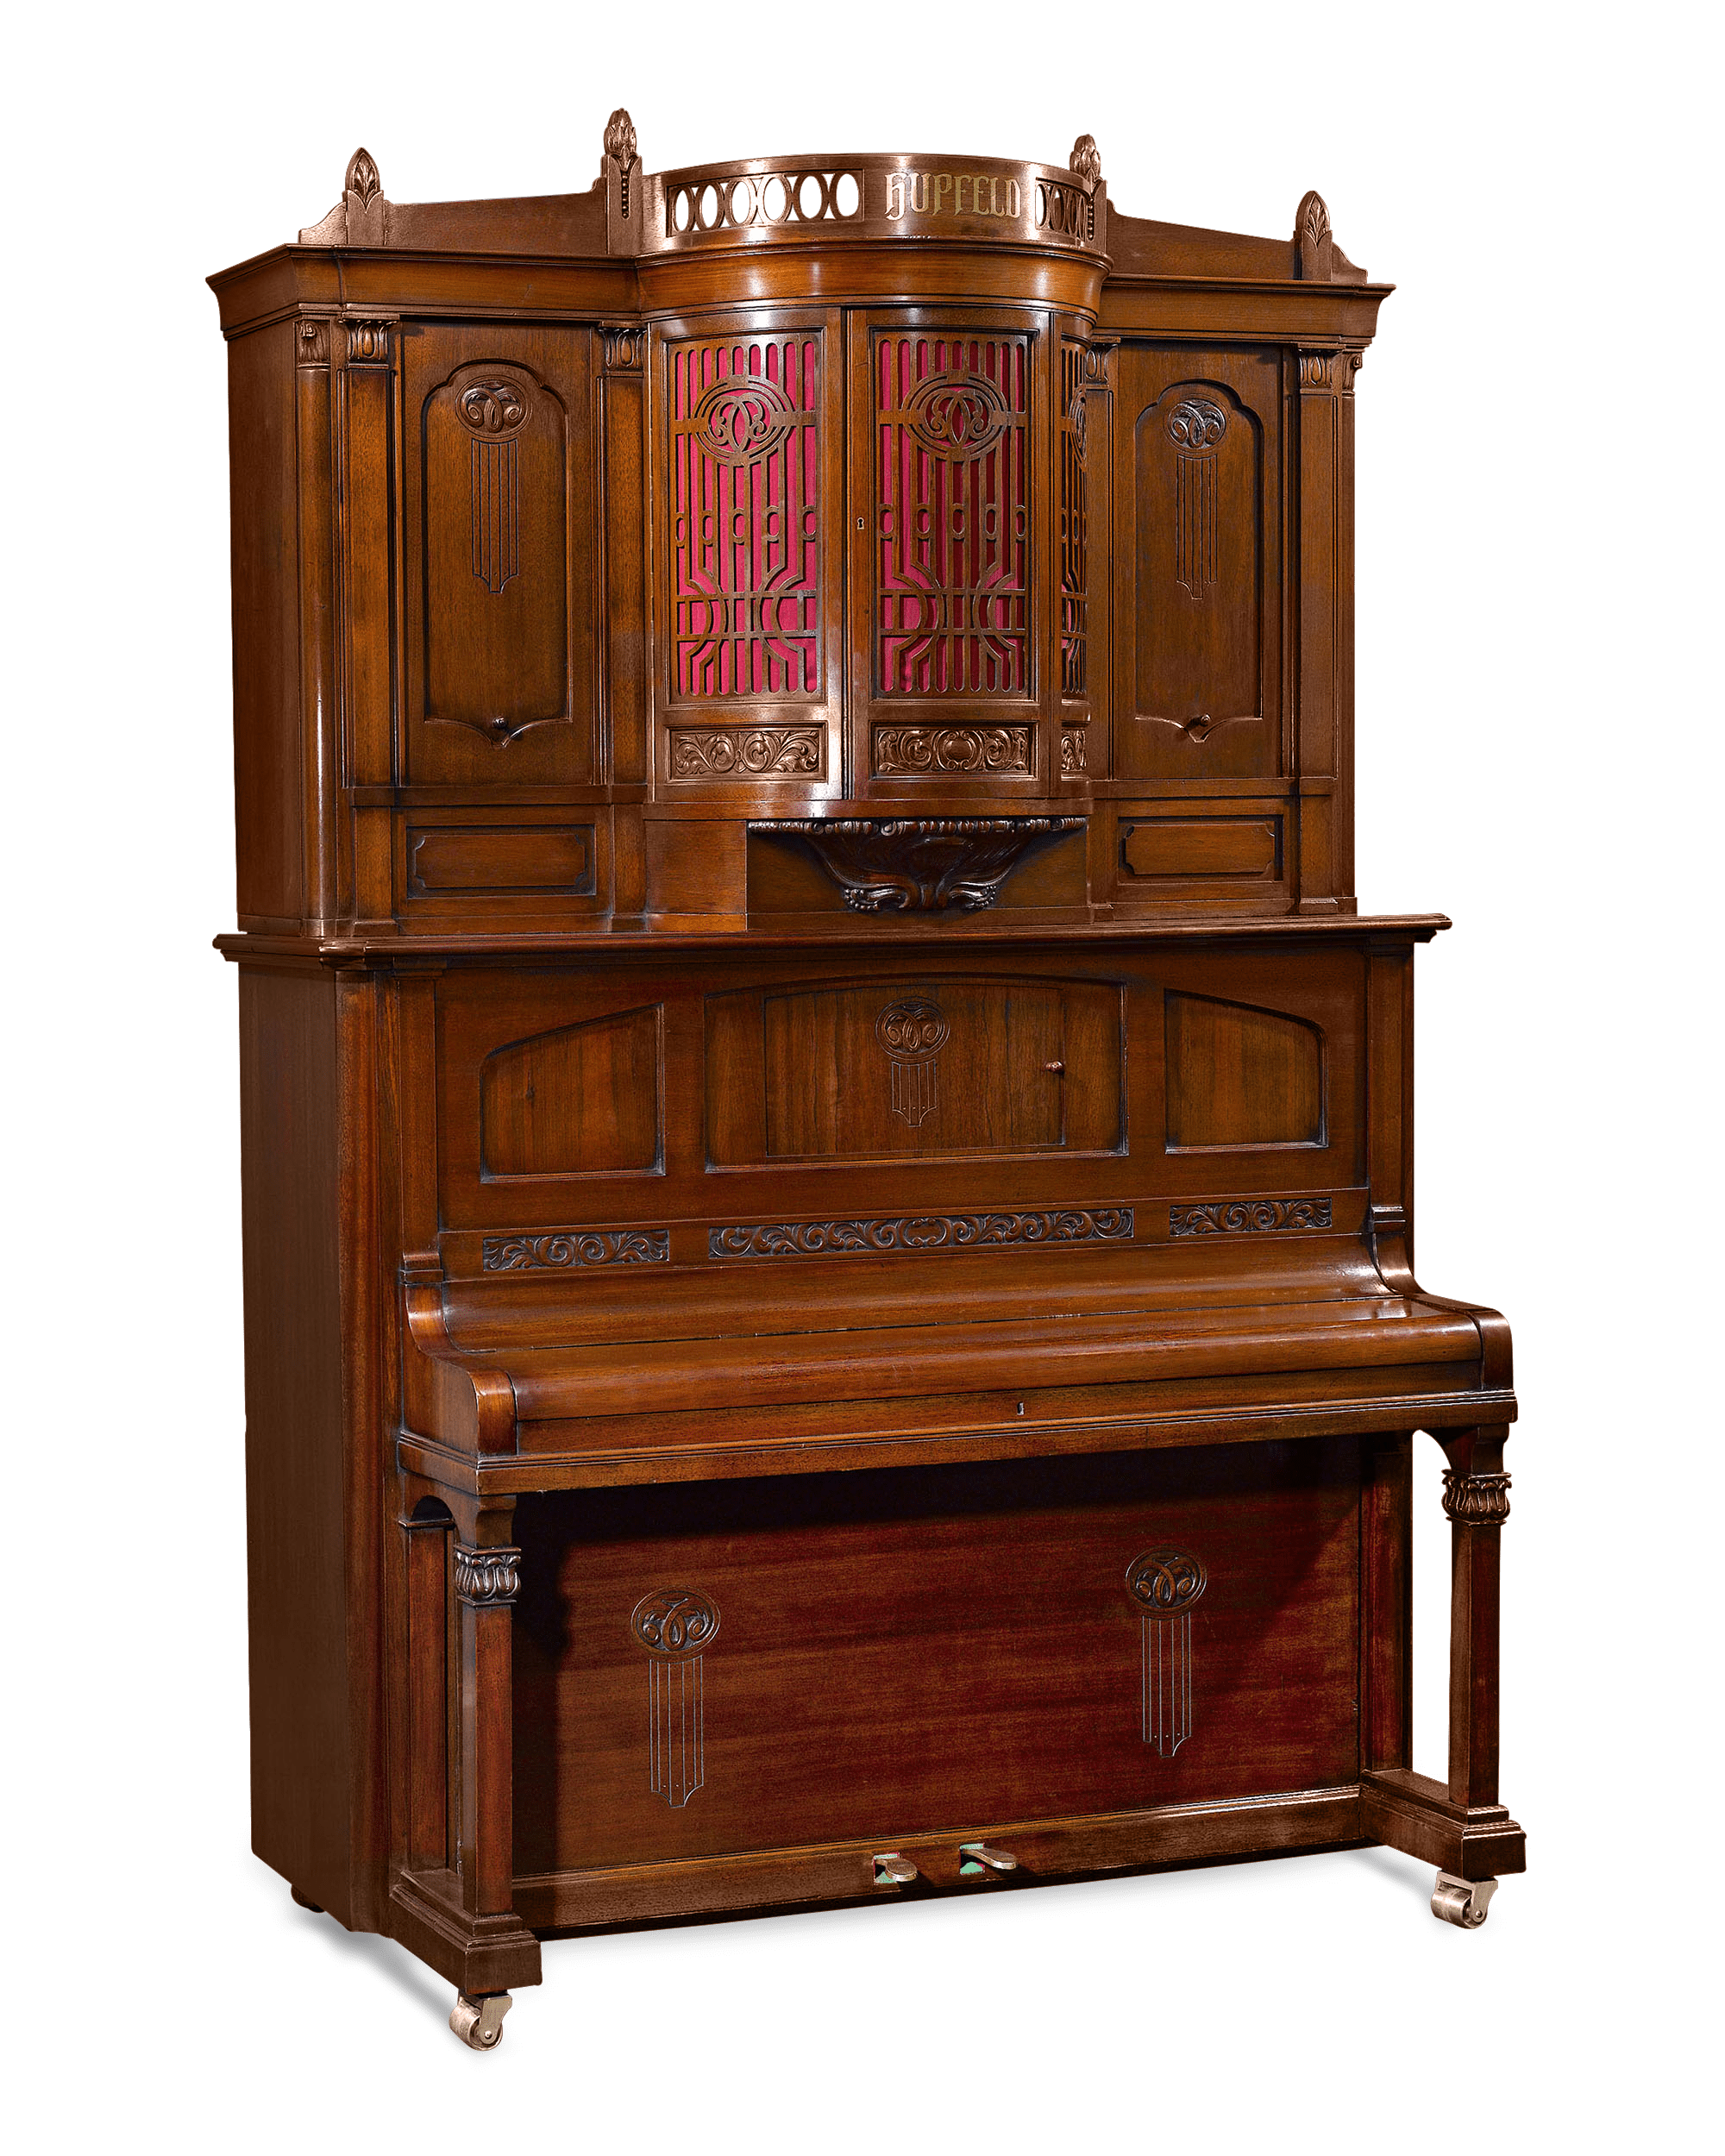 Crafted in 1910, this machine is the most advanced automatic music player of its time